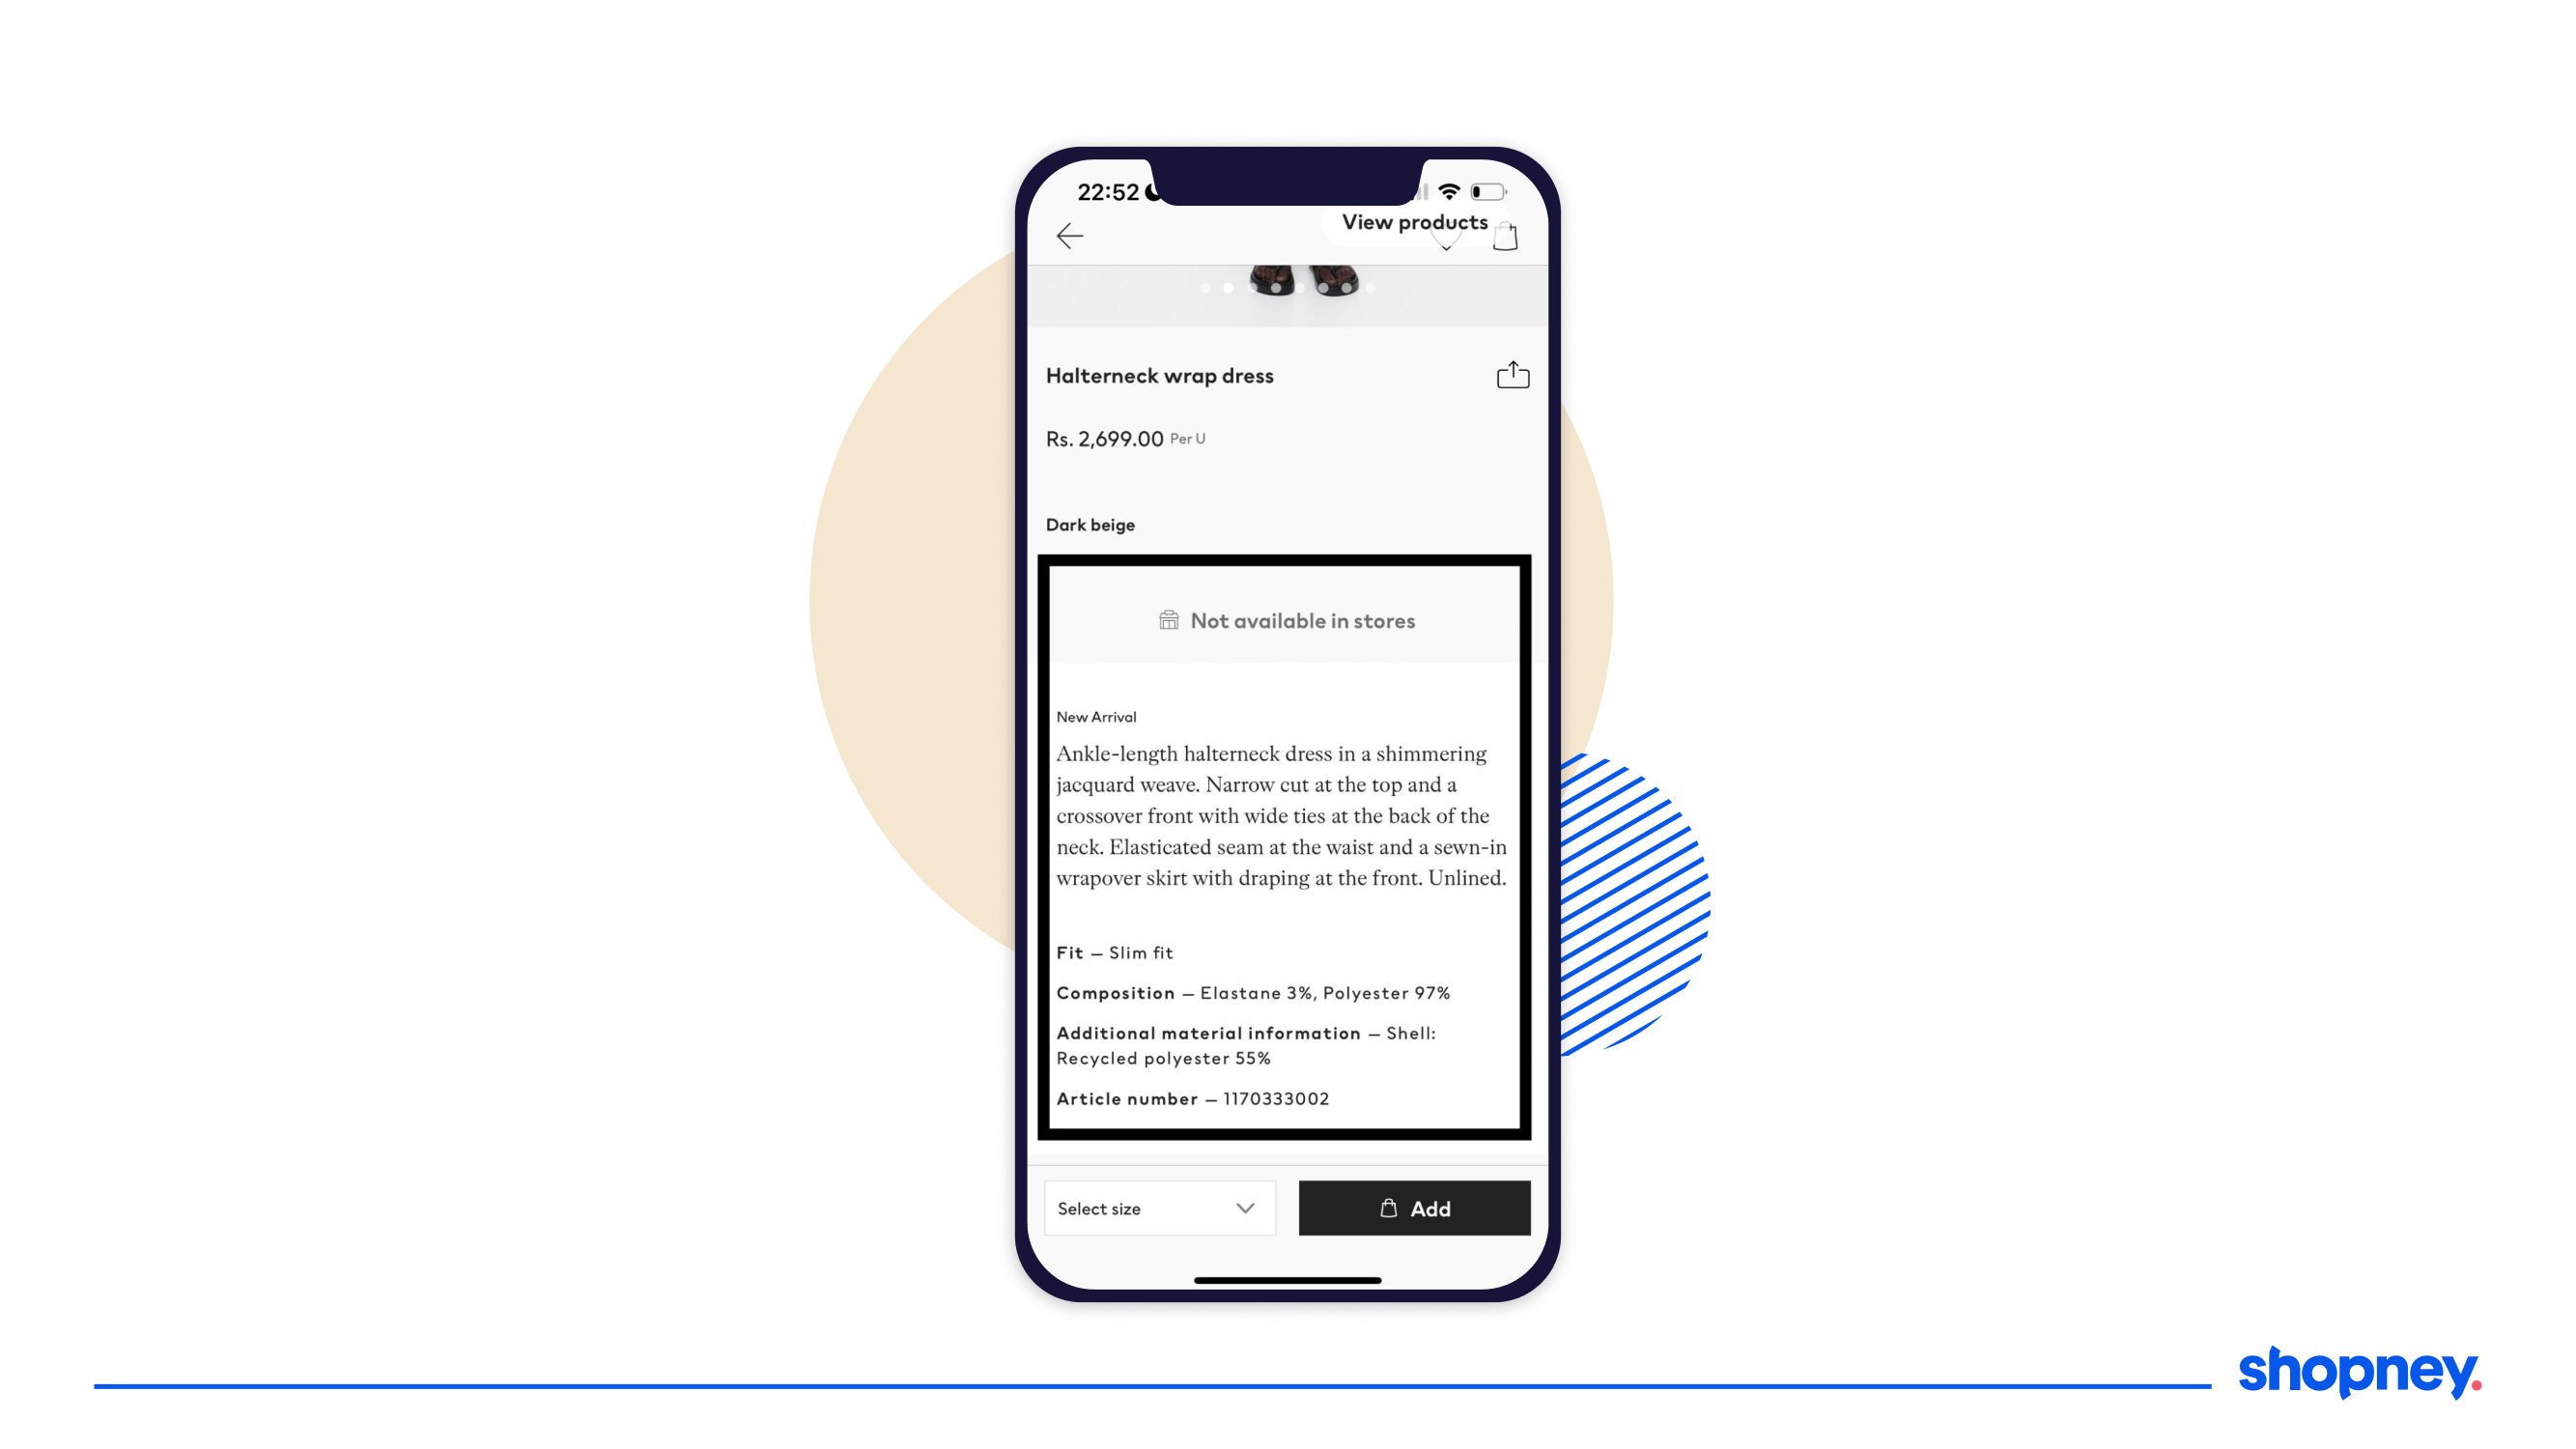 Product details on the mobile app